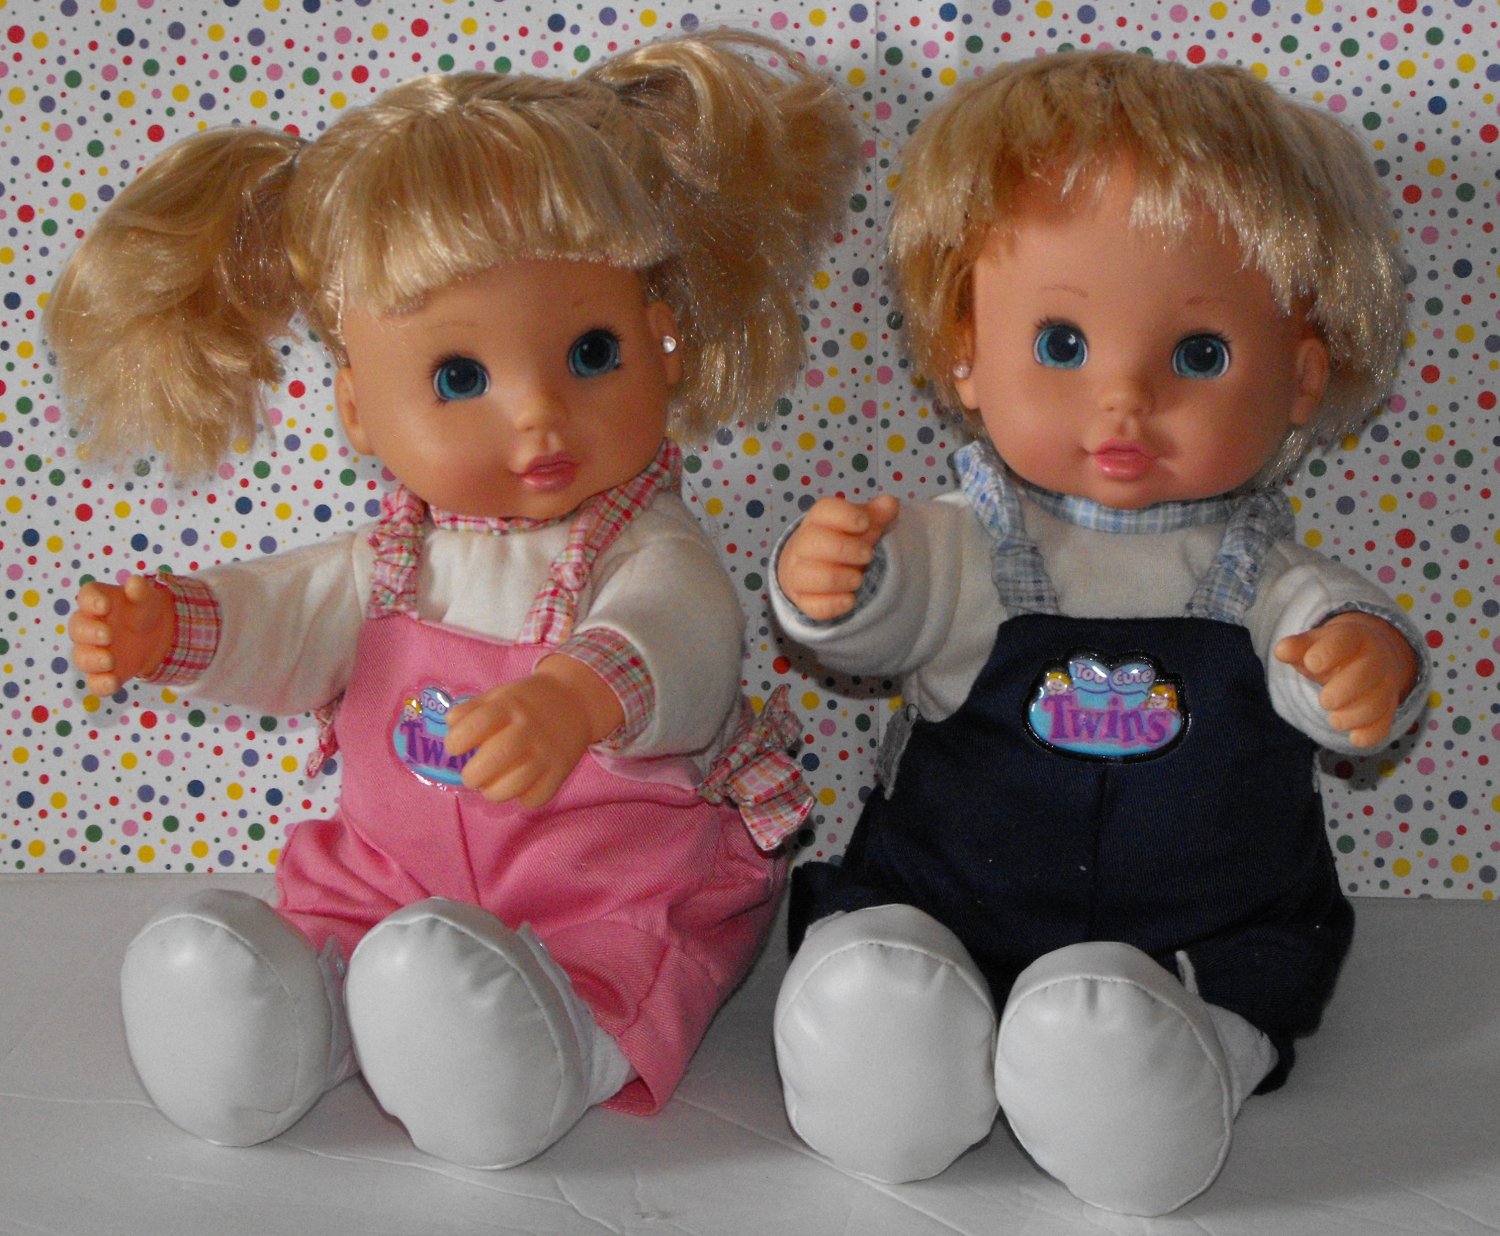 You & Me Mini Twins 8 inch Deluxe Doll Set | eBay